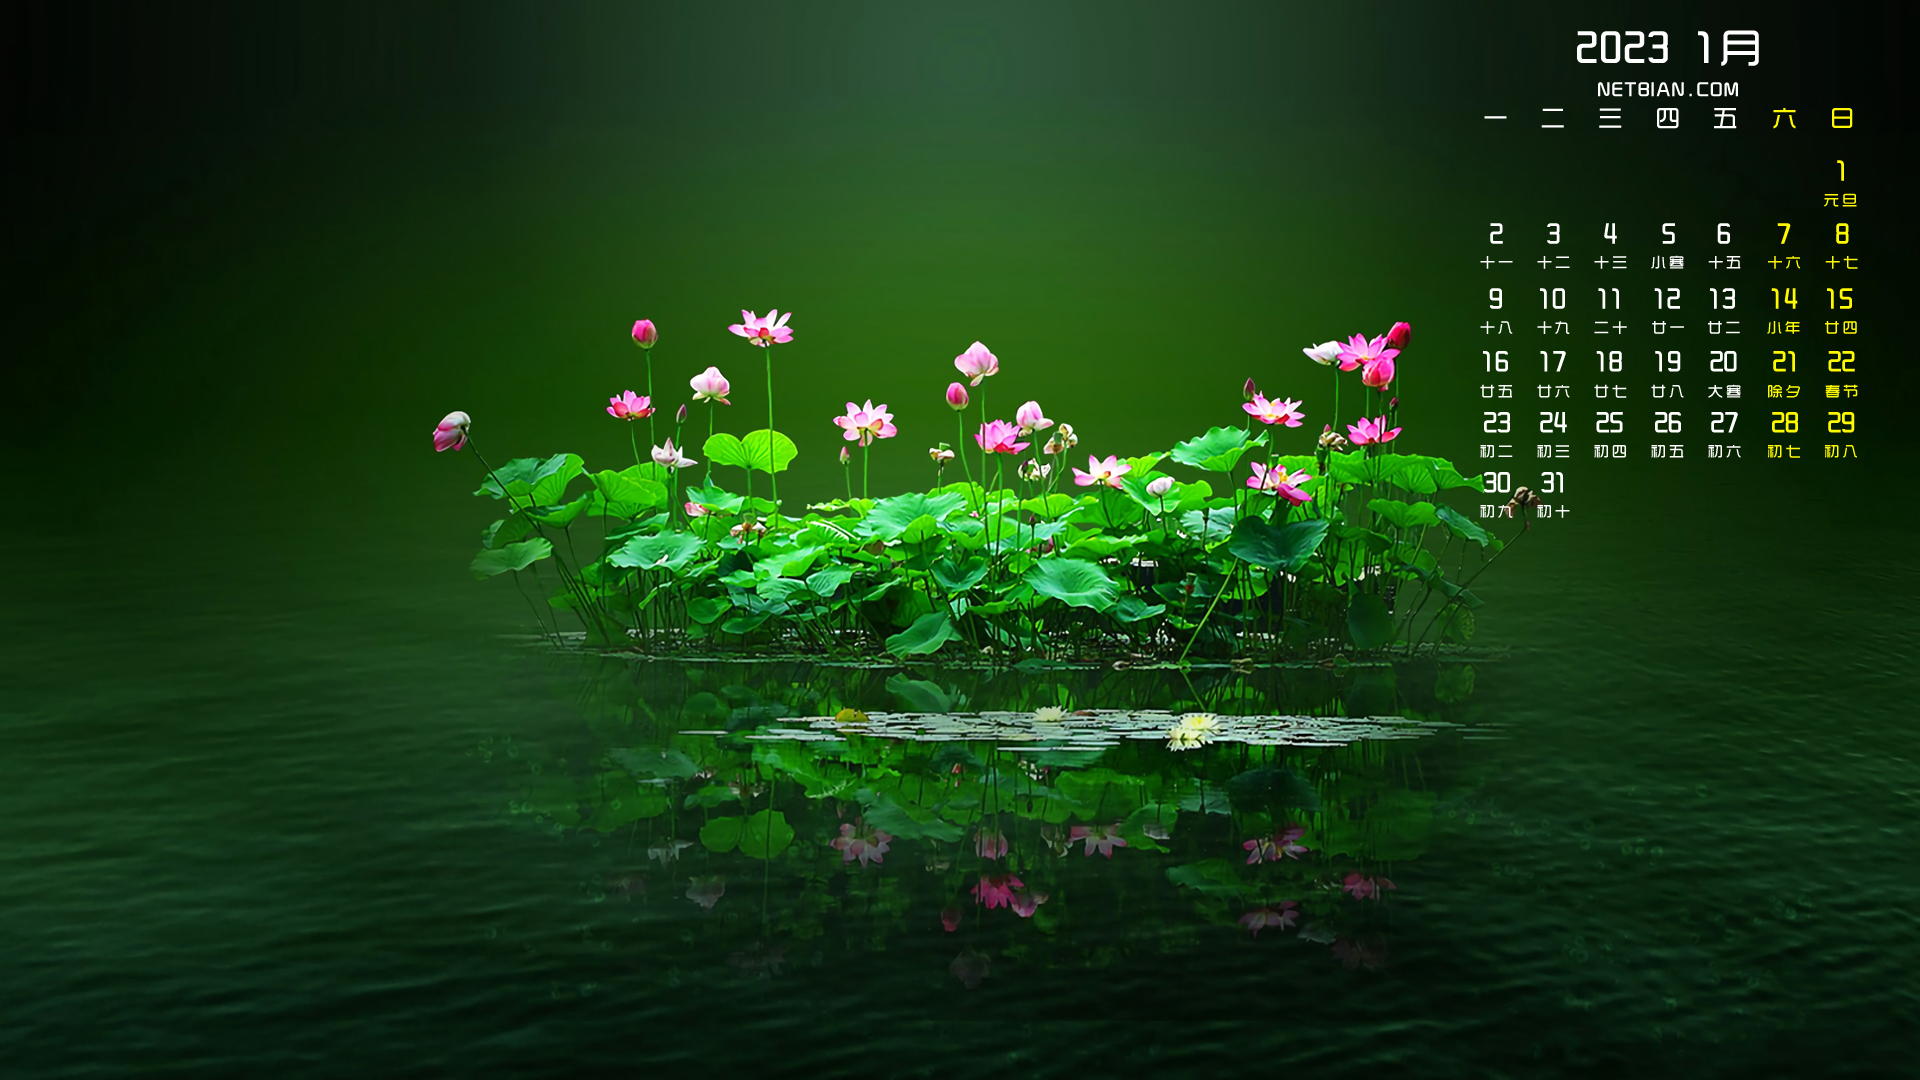 Calendar Water Reflection Leaves Flowers Simple Background Minimalism Japanese 1920x1080